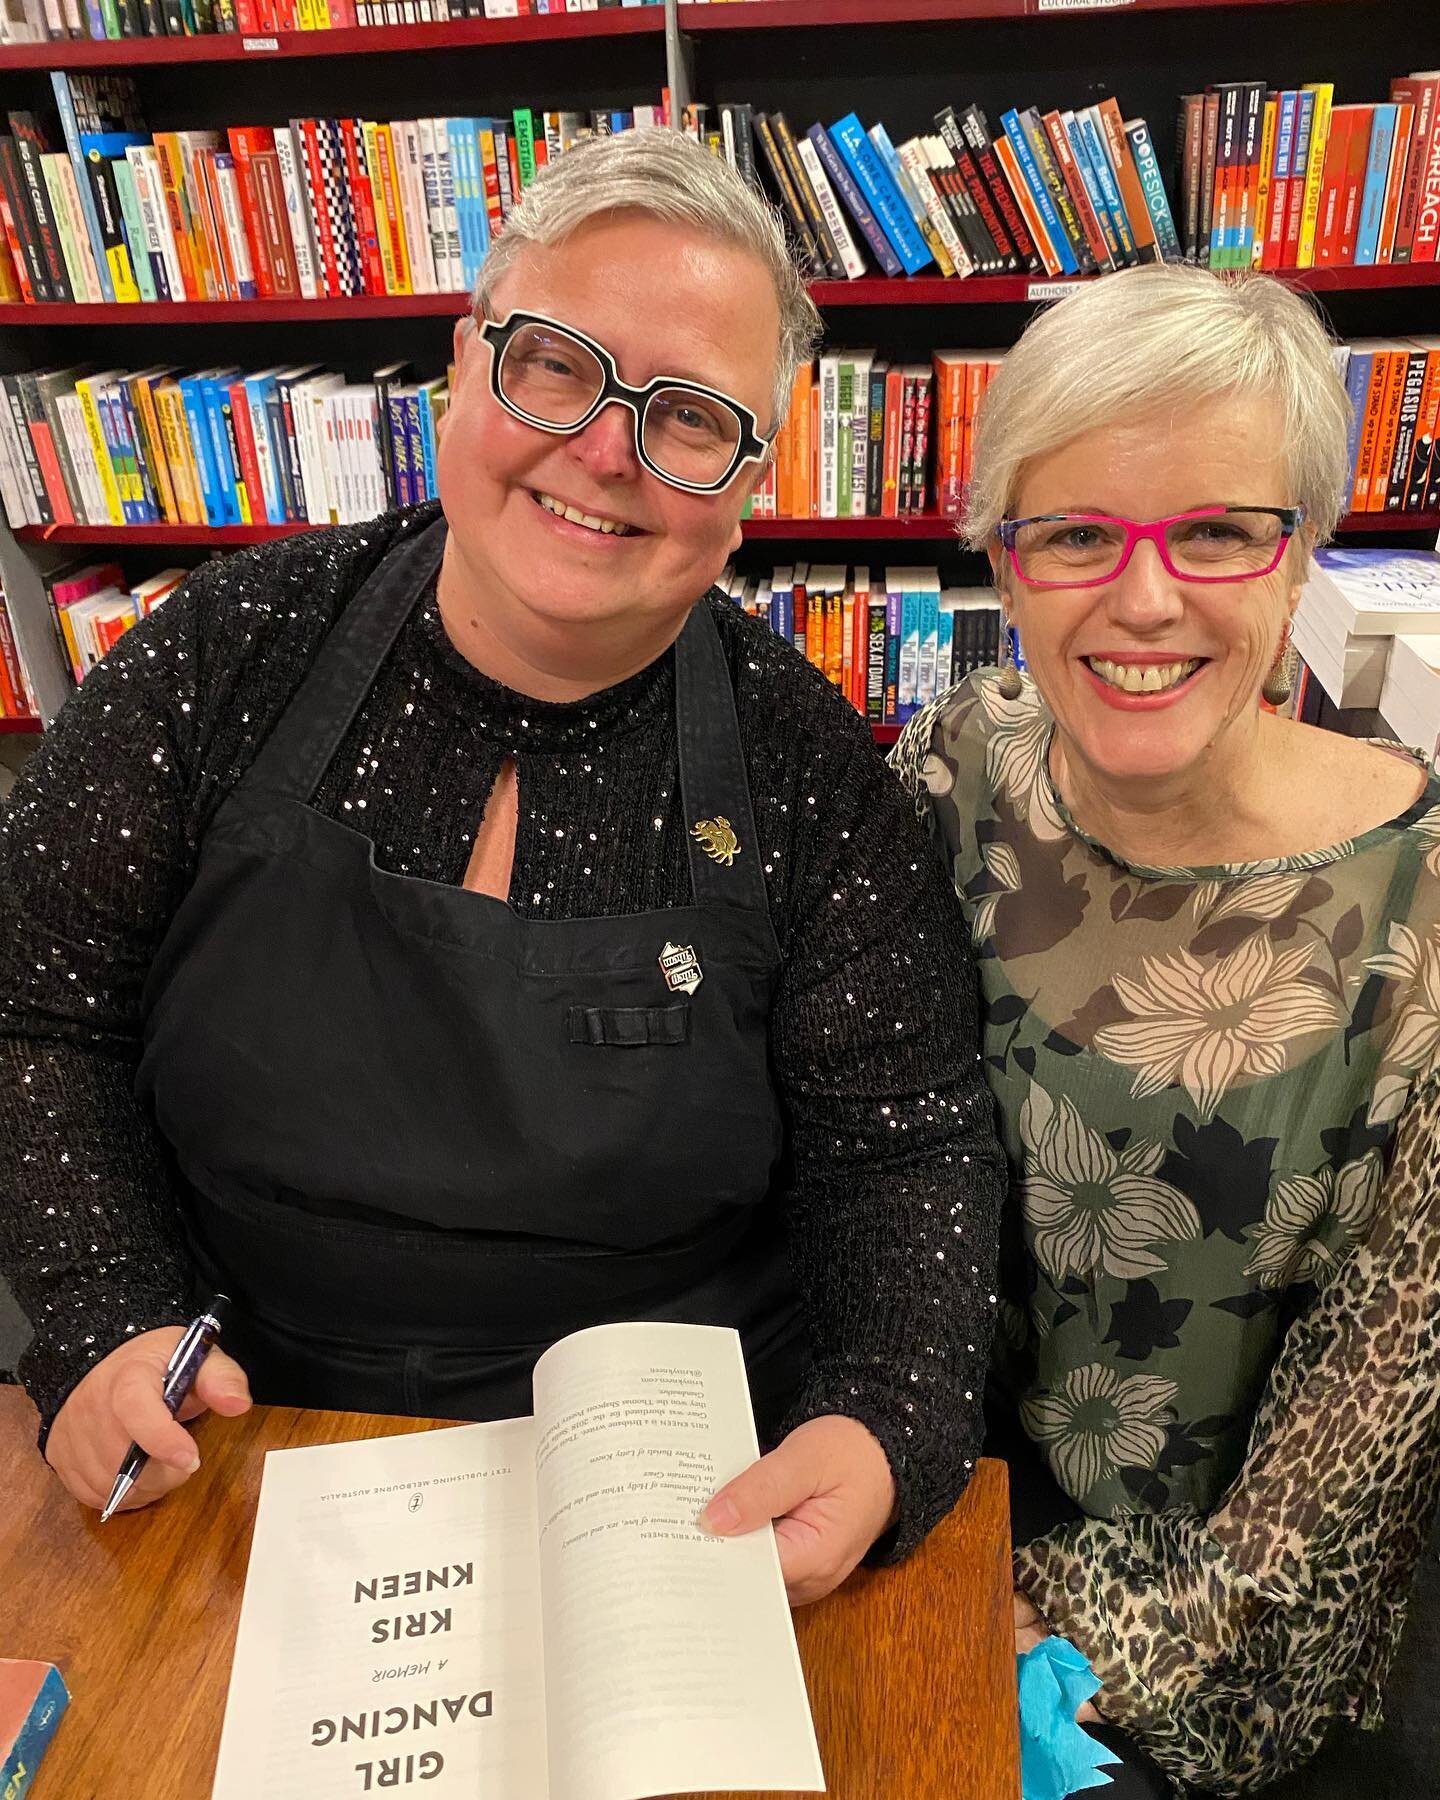 So much love in the room for @kkneen at the launch of their memoir Fat Girl Dancing @avidreader last night. @fionastager made two of her signature uniquely different cakes, these ones made with mushrooms! And @carodyc asked the best questions like sh